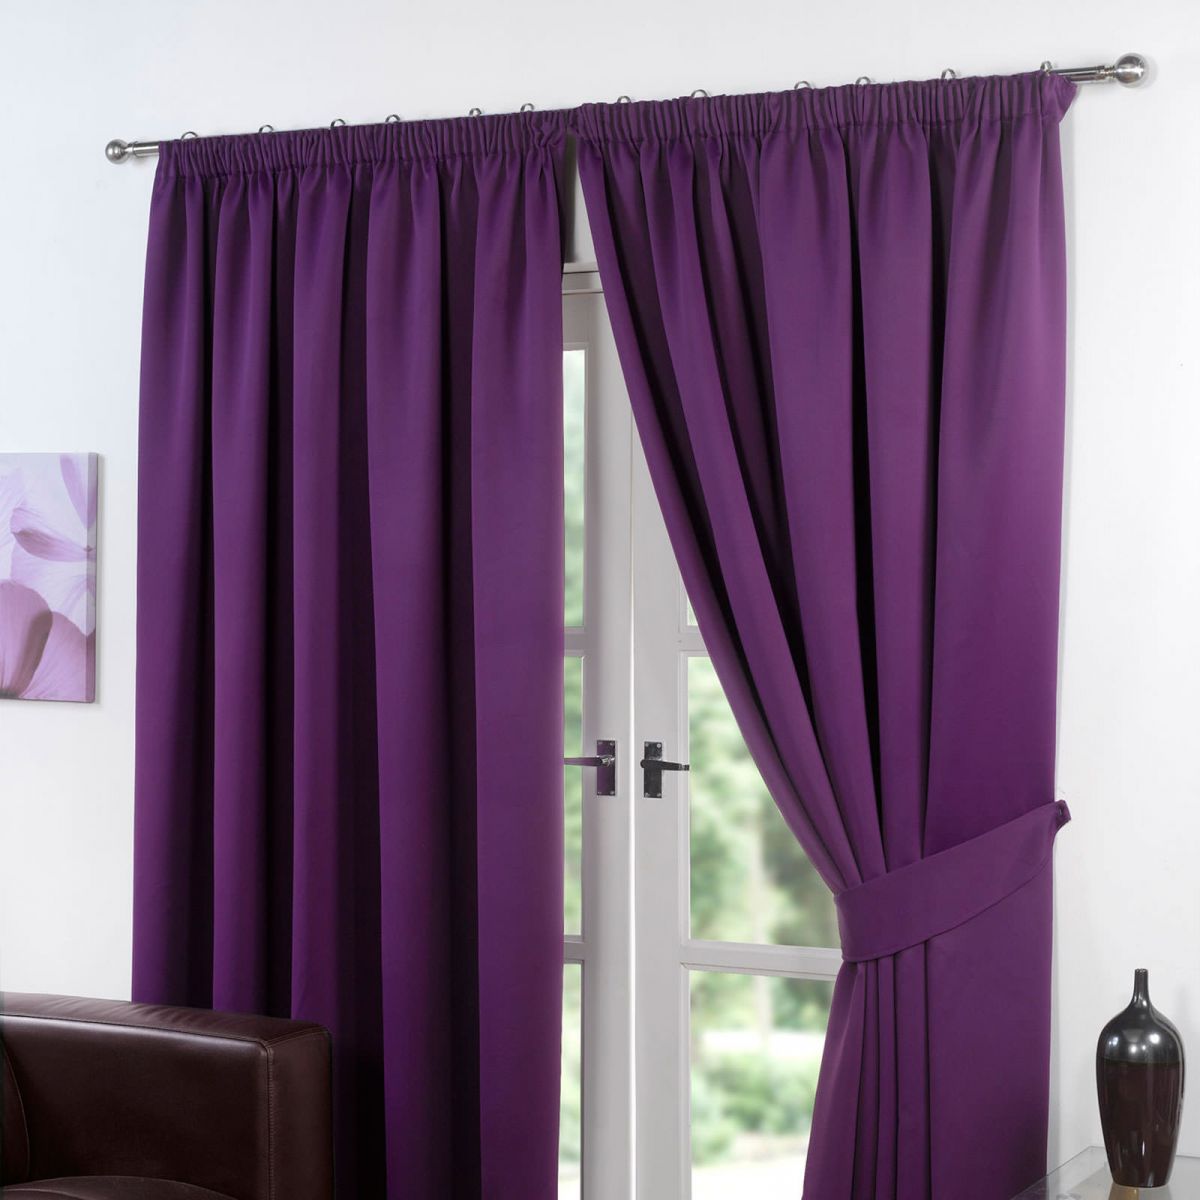 Pencil Pleat Thermal Blackout Fully Lined Curtains - Plum 46x54